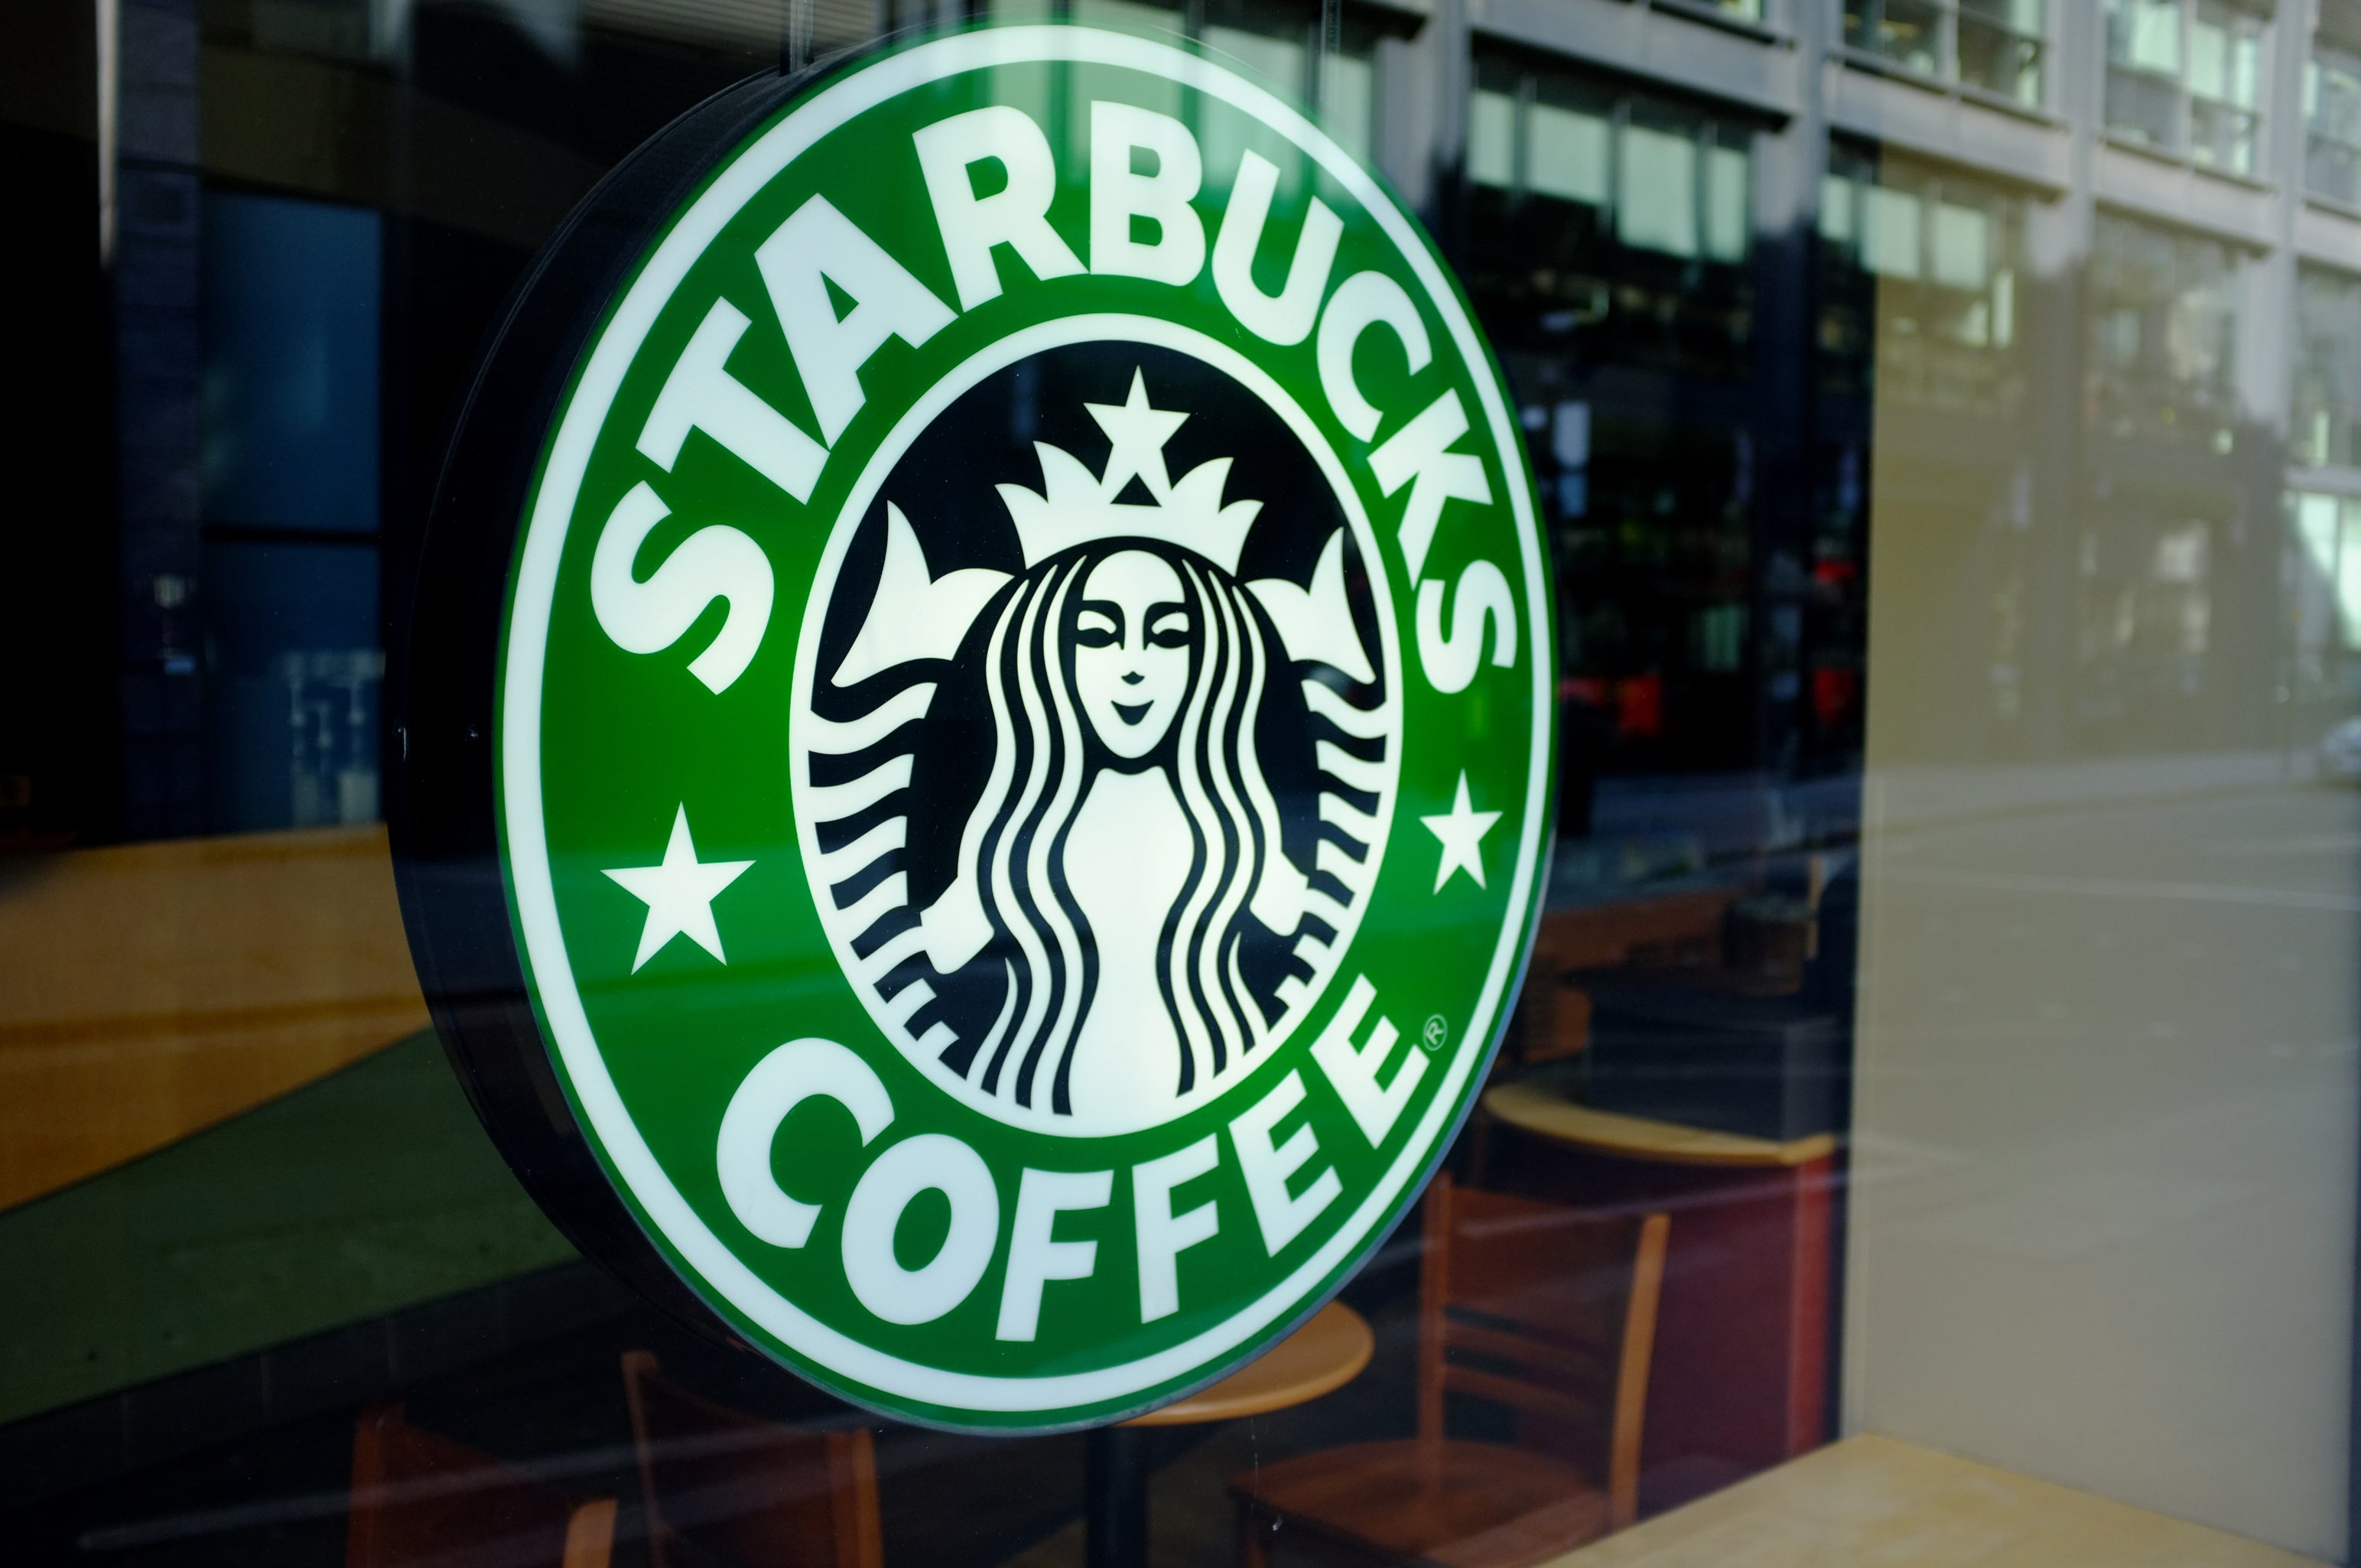 Woman sues Starbucks after sustaining burns from spilled coffee